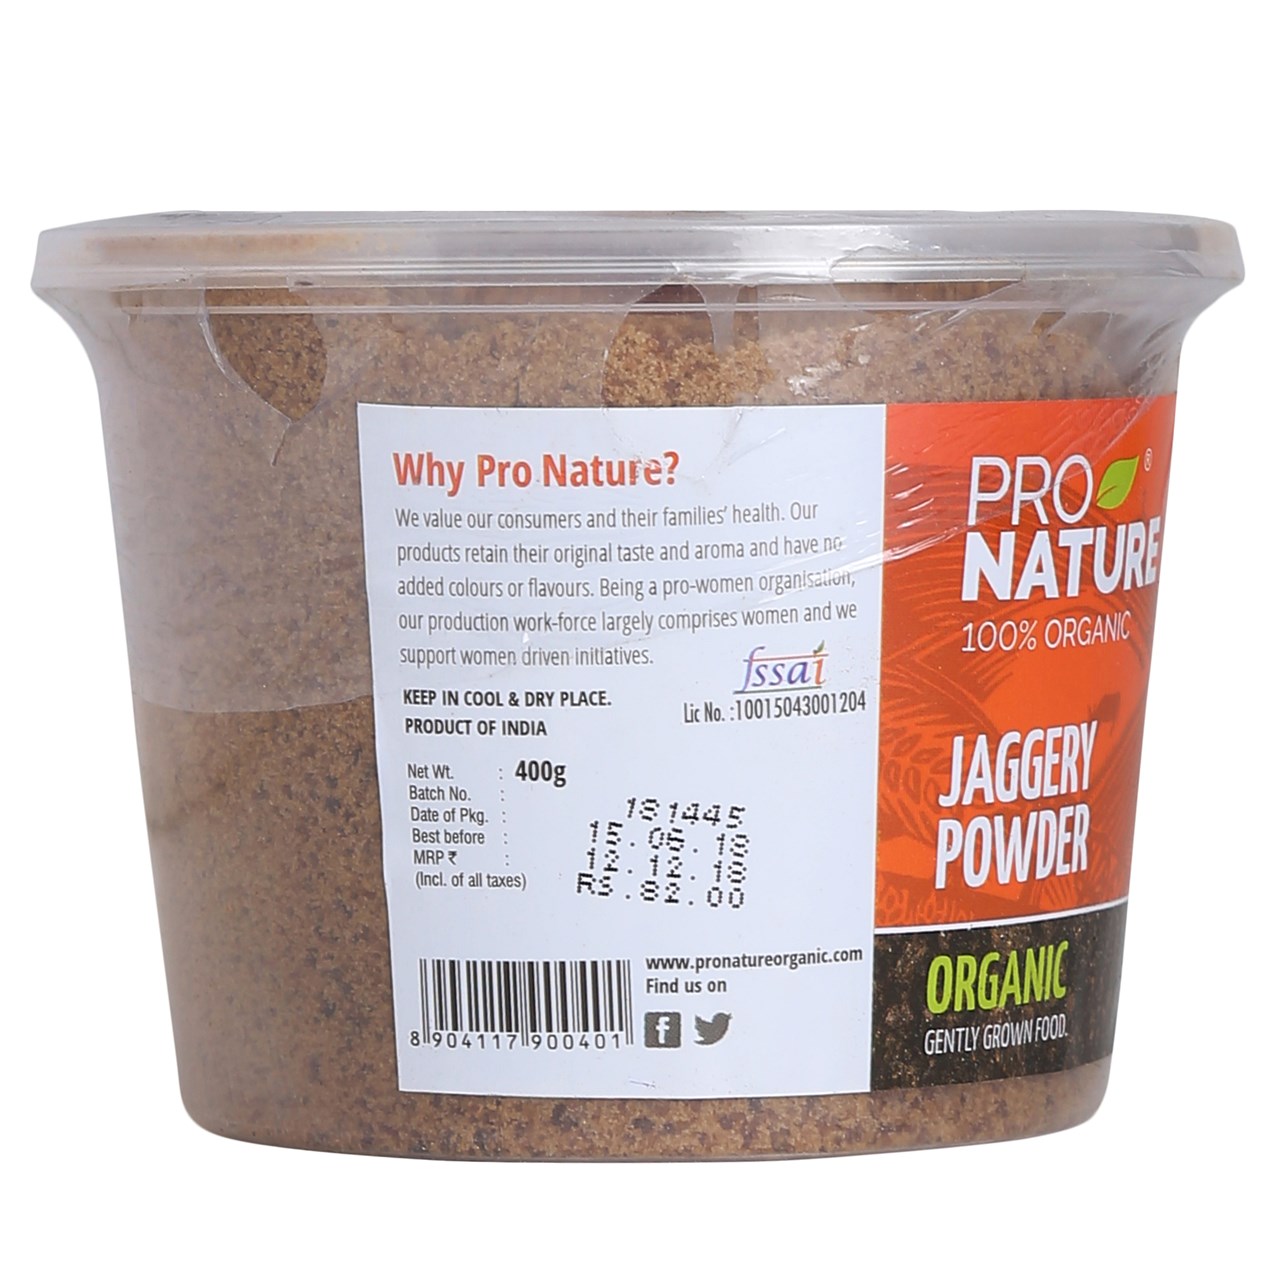 Picture of Pro Nature 100% Organic Jaggery Powder 300g (Tub)